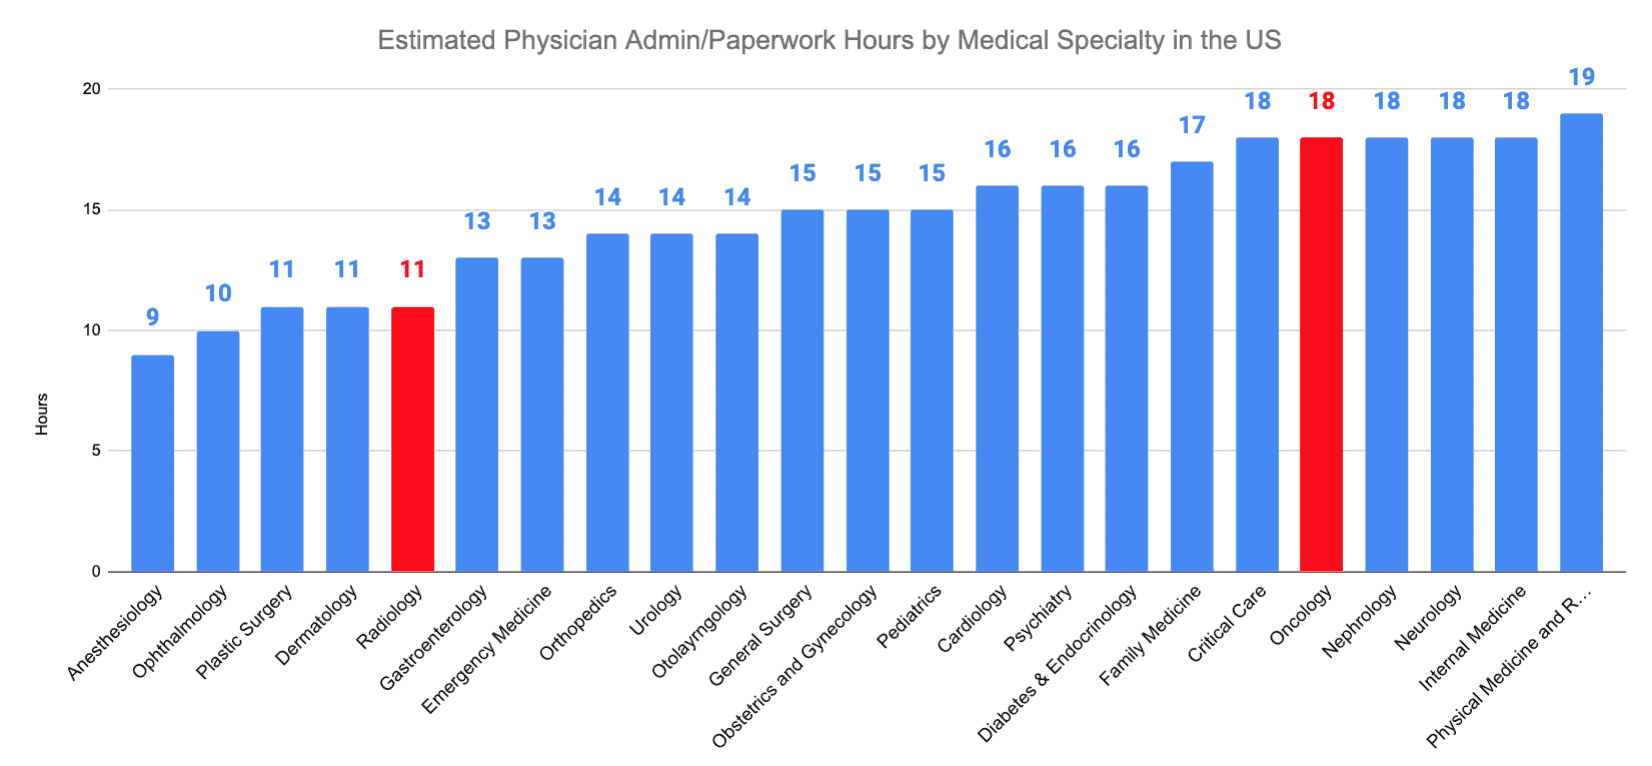 Radiology vs Hematology and Oncology Estimated Physician Admin/Paperwork Hours by Medical Specialty in the US